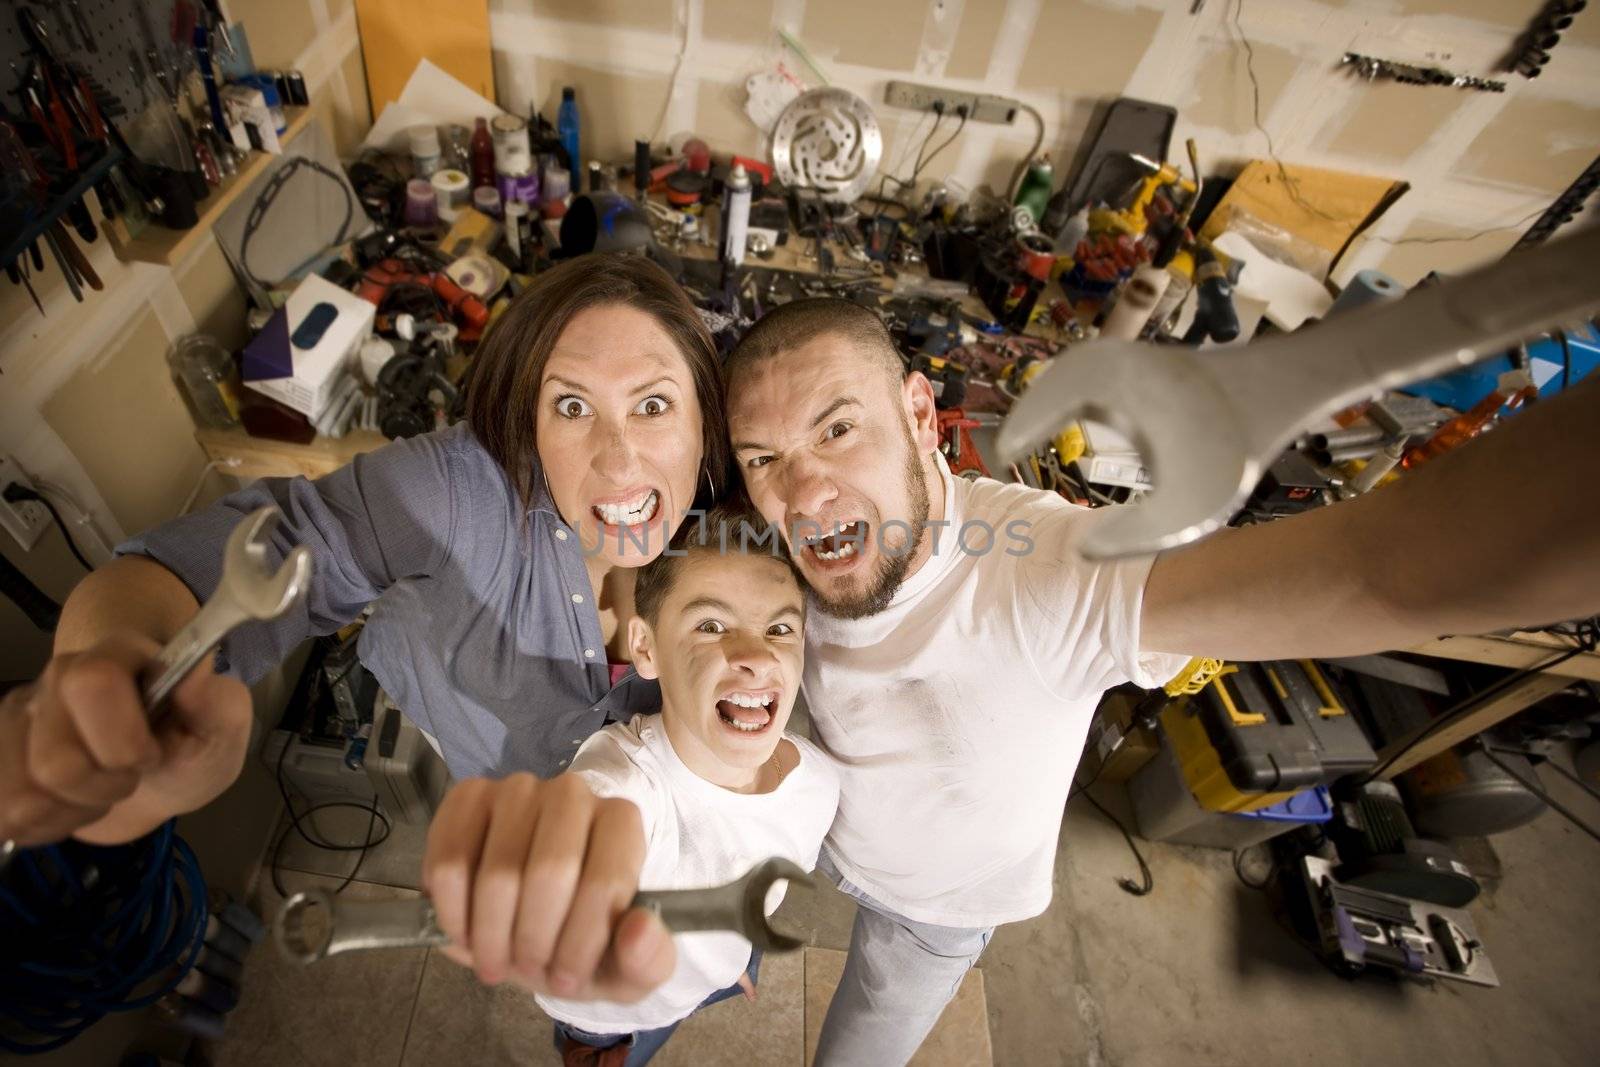 Crazy Do-It-Yourself family with wrenches by Creatista